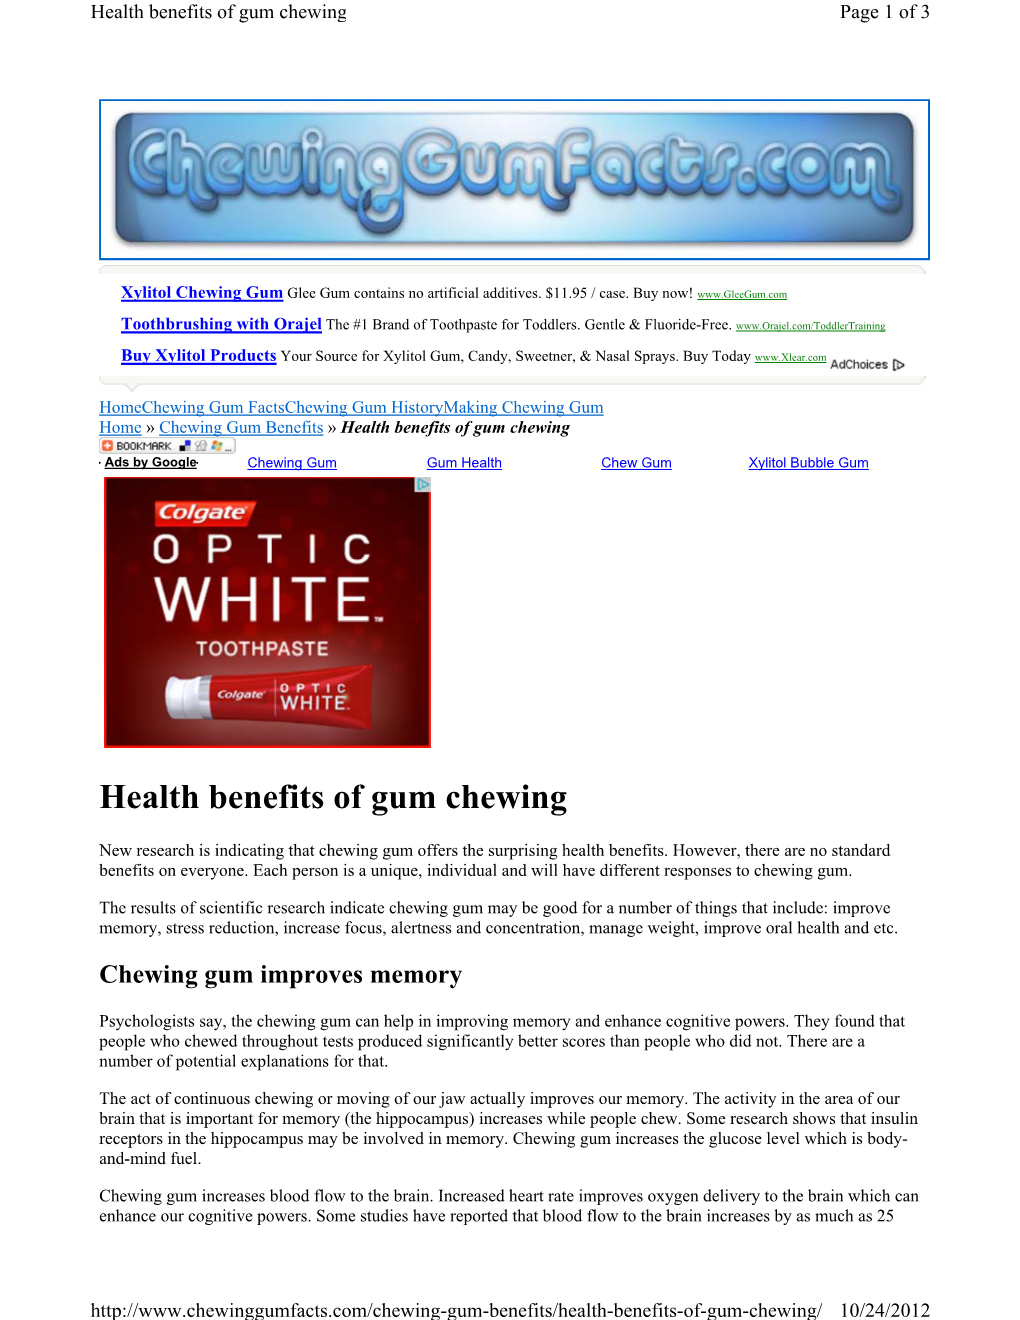 Health Benefits of Gum Chewing Page 1 of 3